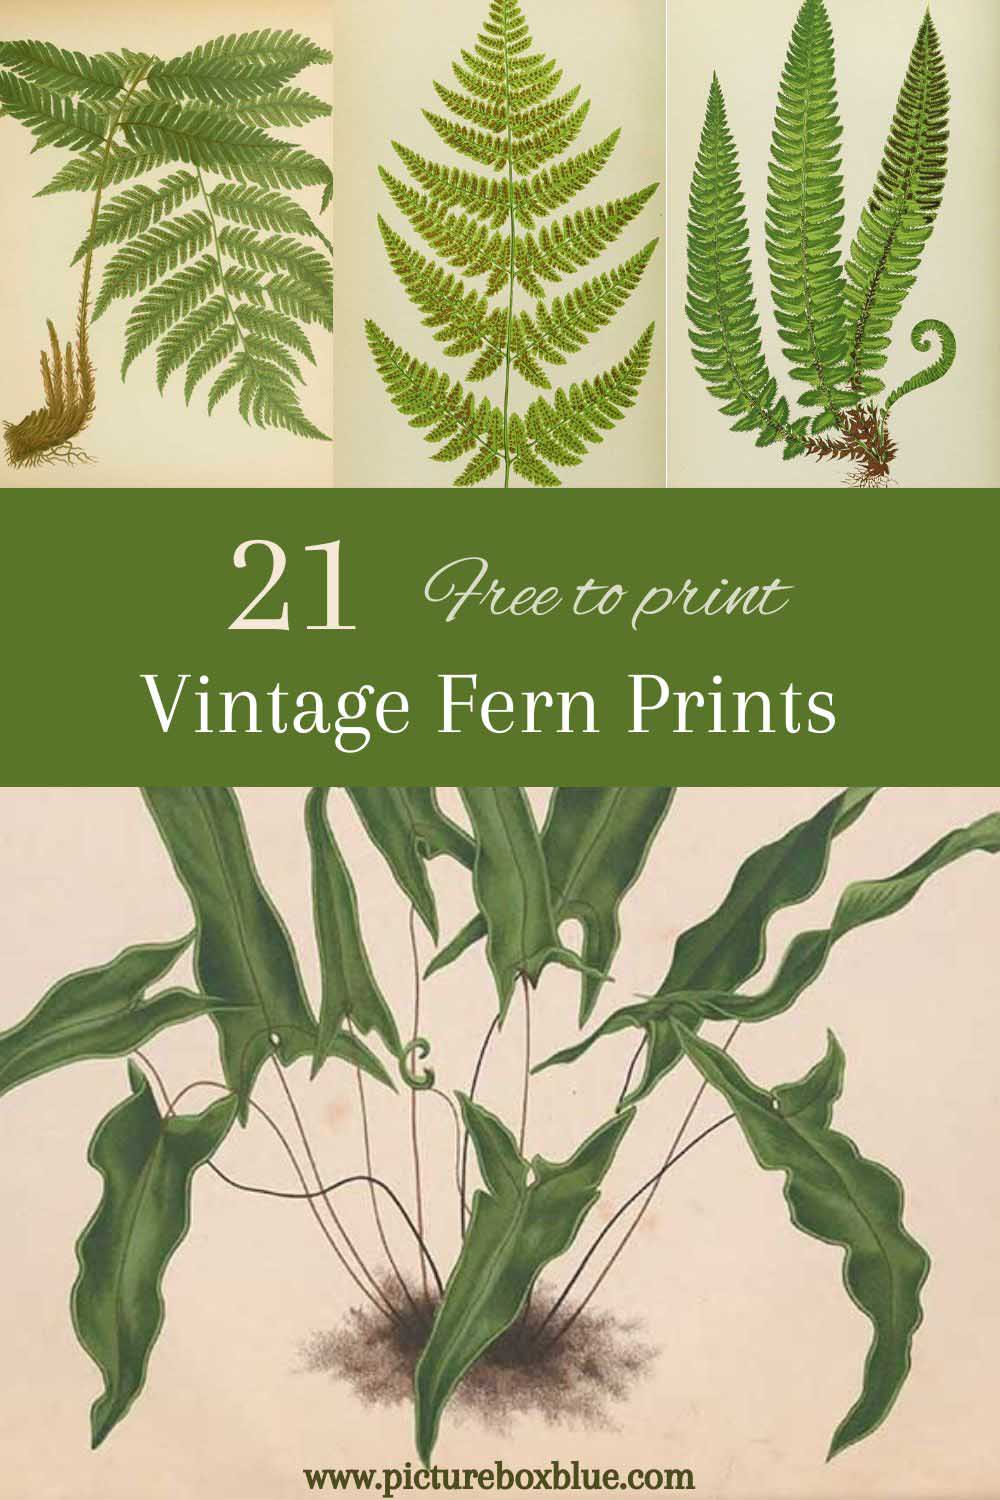 Vintage fern prints in the Public Domain Pin